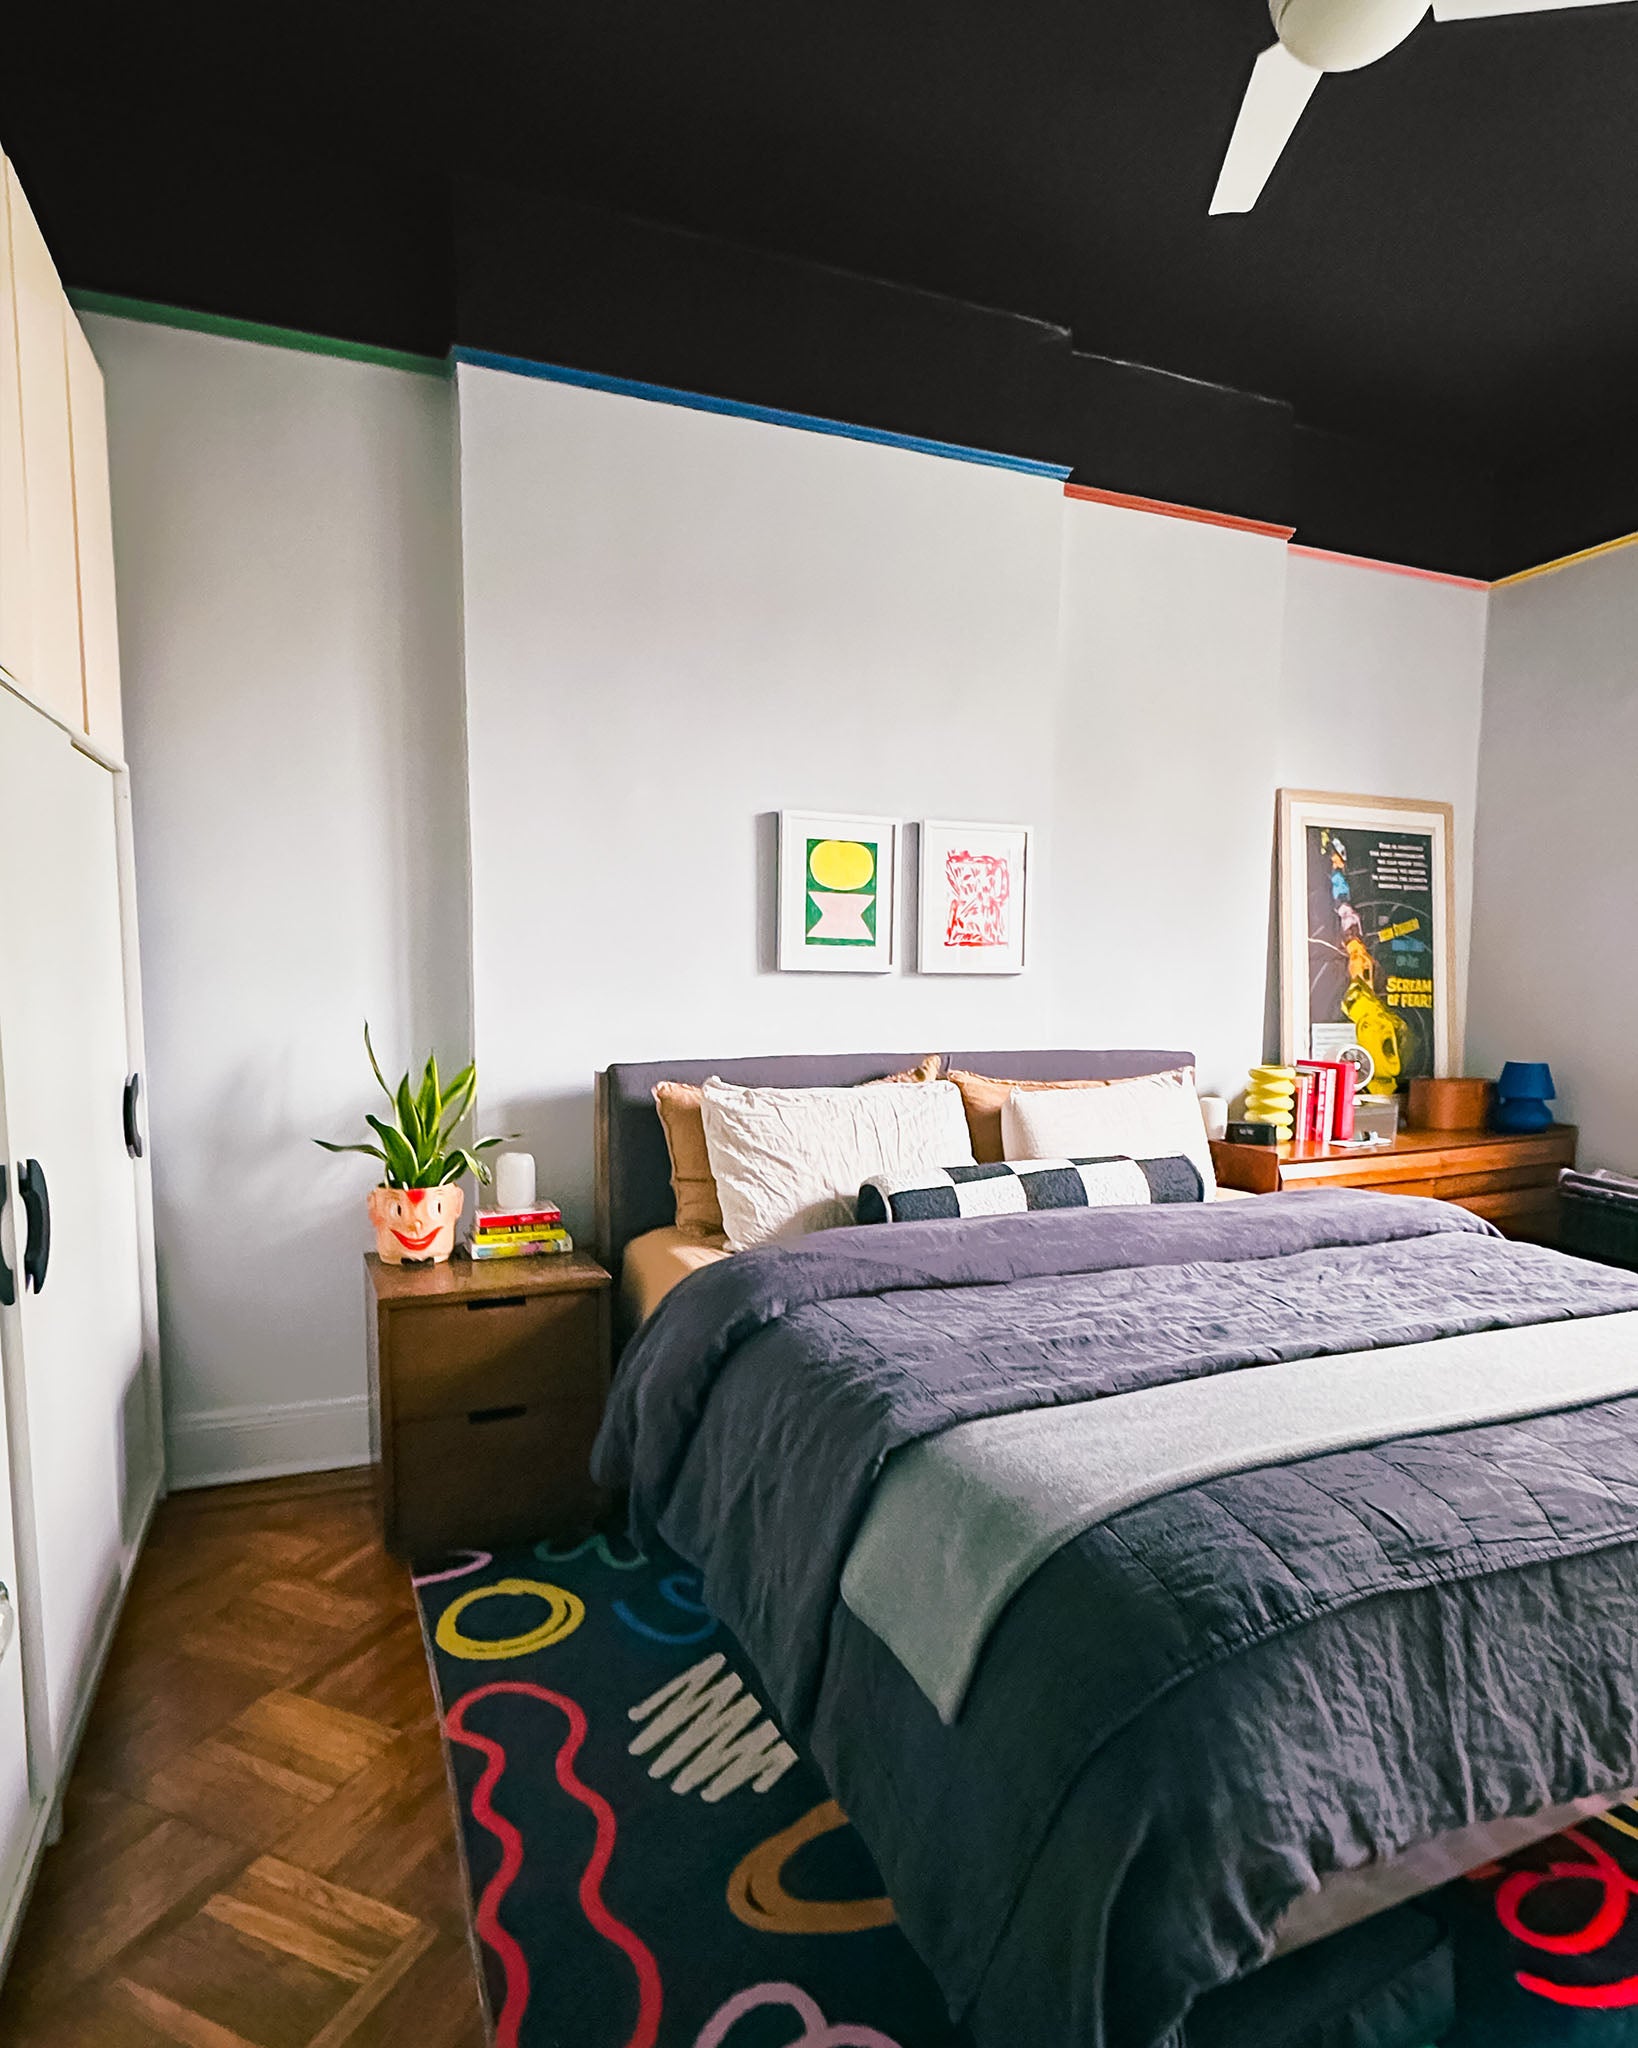 Ready to refresh your space? Look up. Blackish, a deep nearly black paint from Clare, helped transform a once-basic bedroom into a cozy retreat with a fresh coat on the ceiling. Check out how Clare Collective ambassador Lauren HOM transformed this NYC bedroom on the Clare blog.